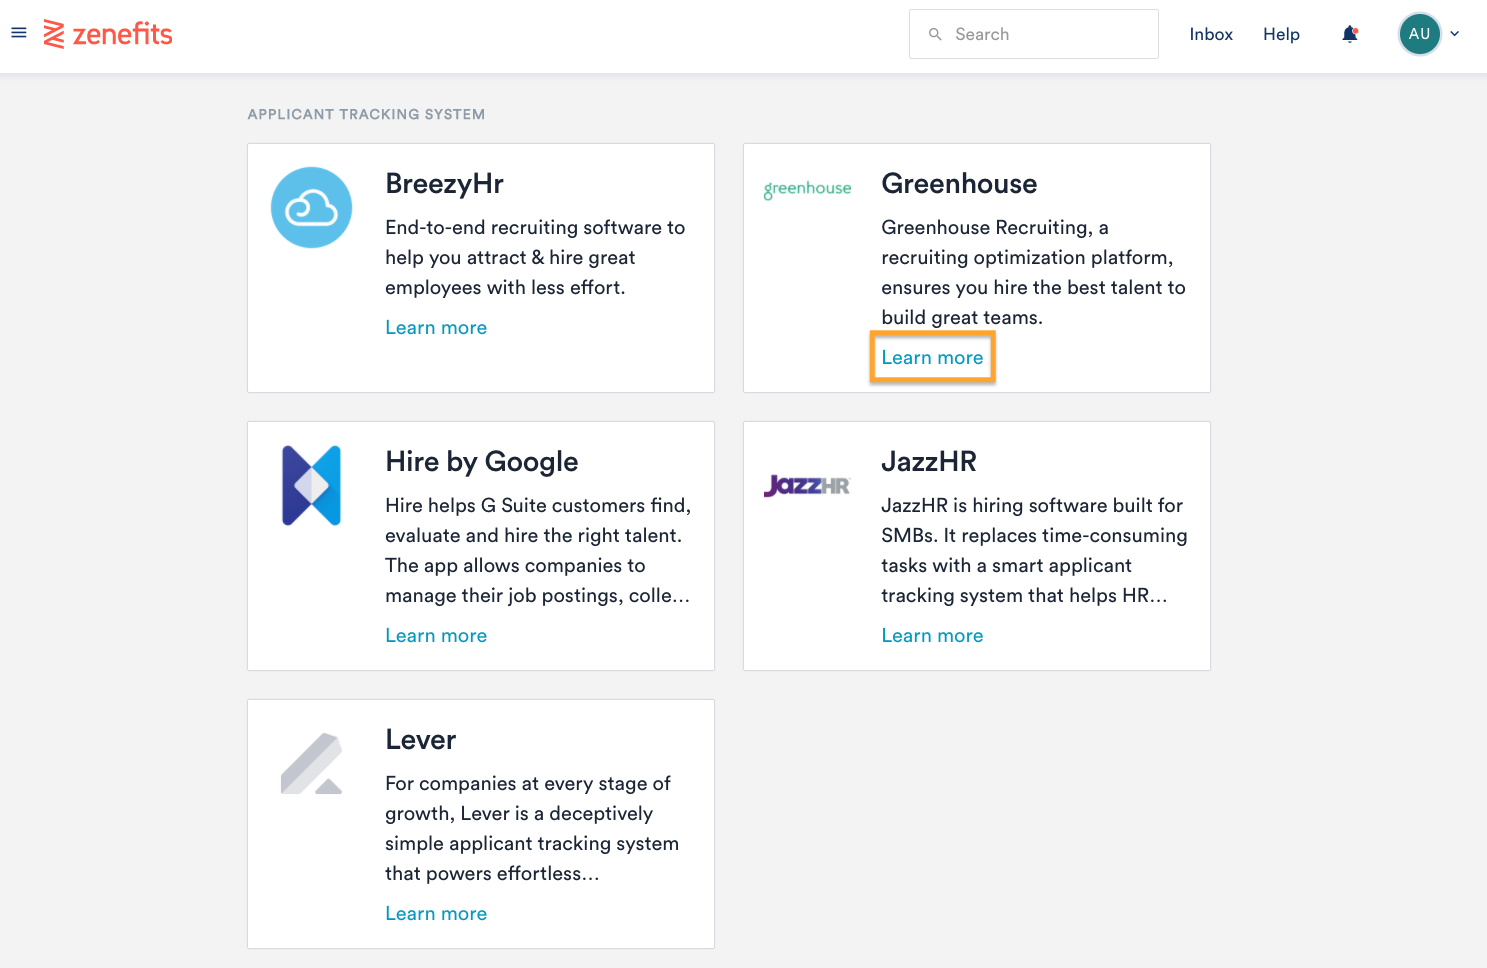 The Zenefits platform shows the Learn more button highlighted